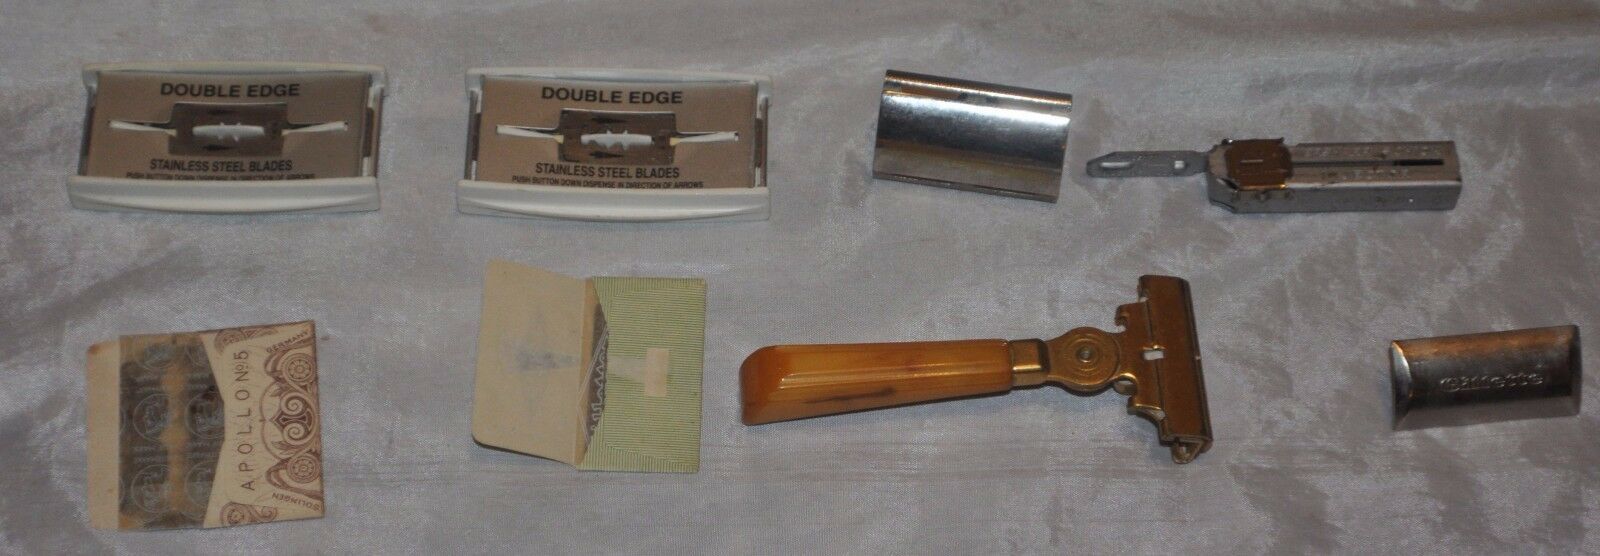 Primary image for Lot of Vintage Schick Safety injector razors: 2 Type J and 1 Type L with blades